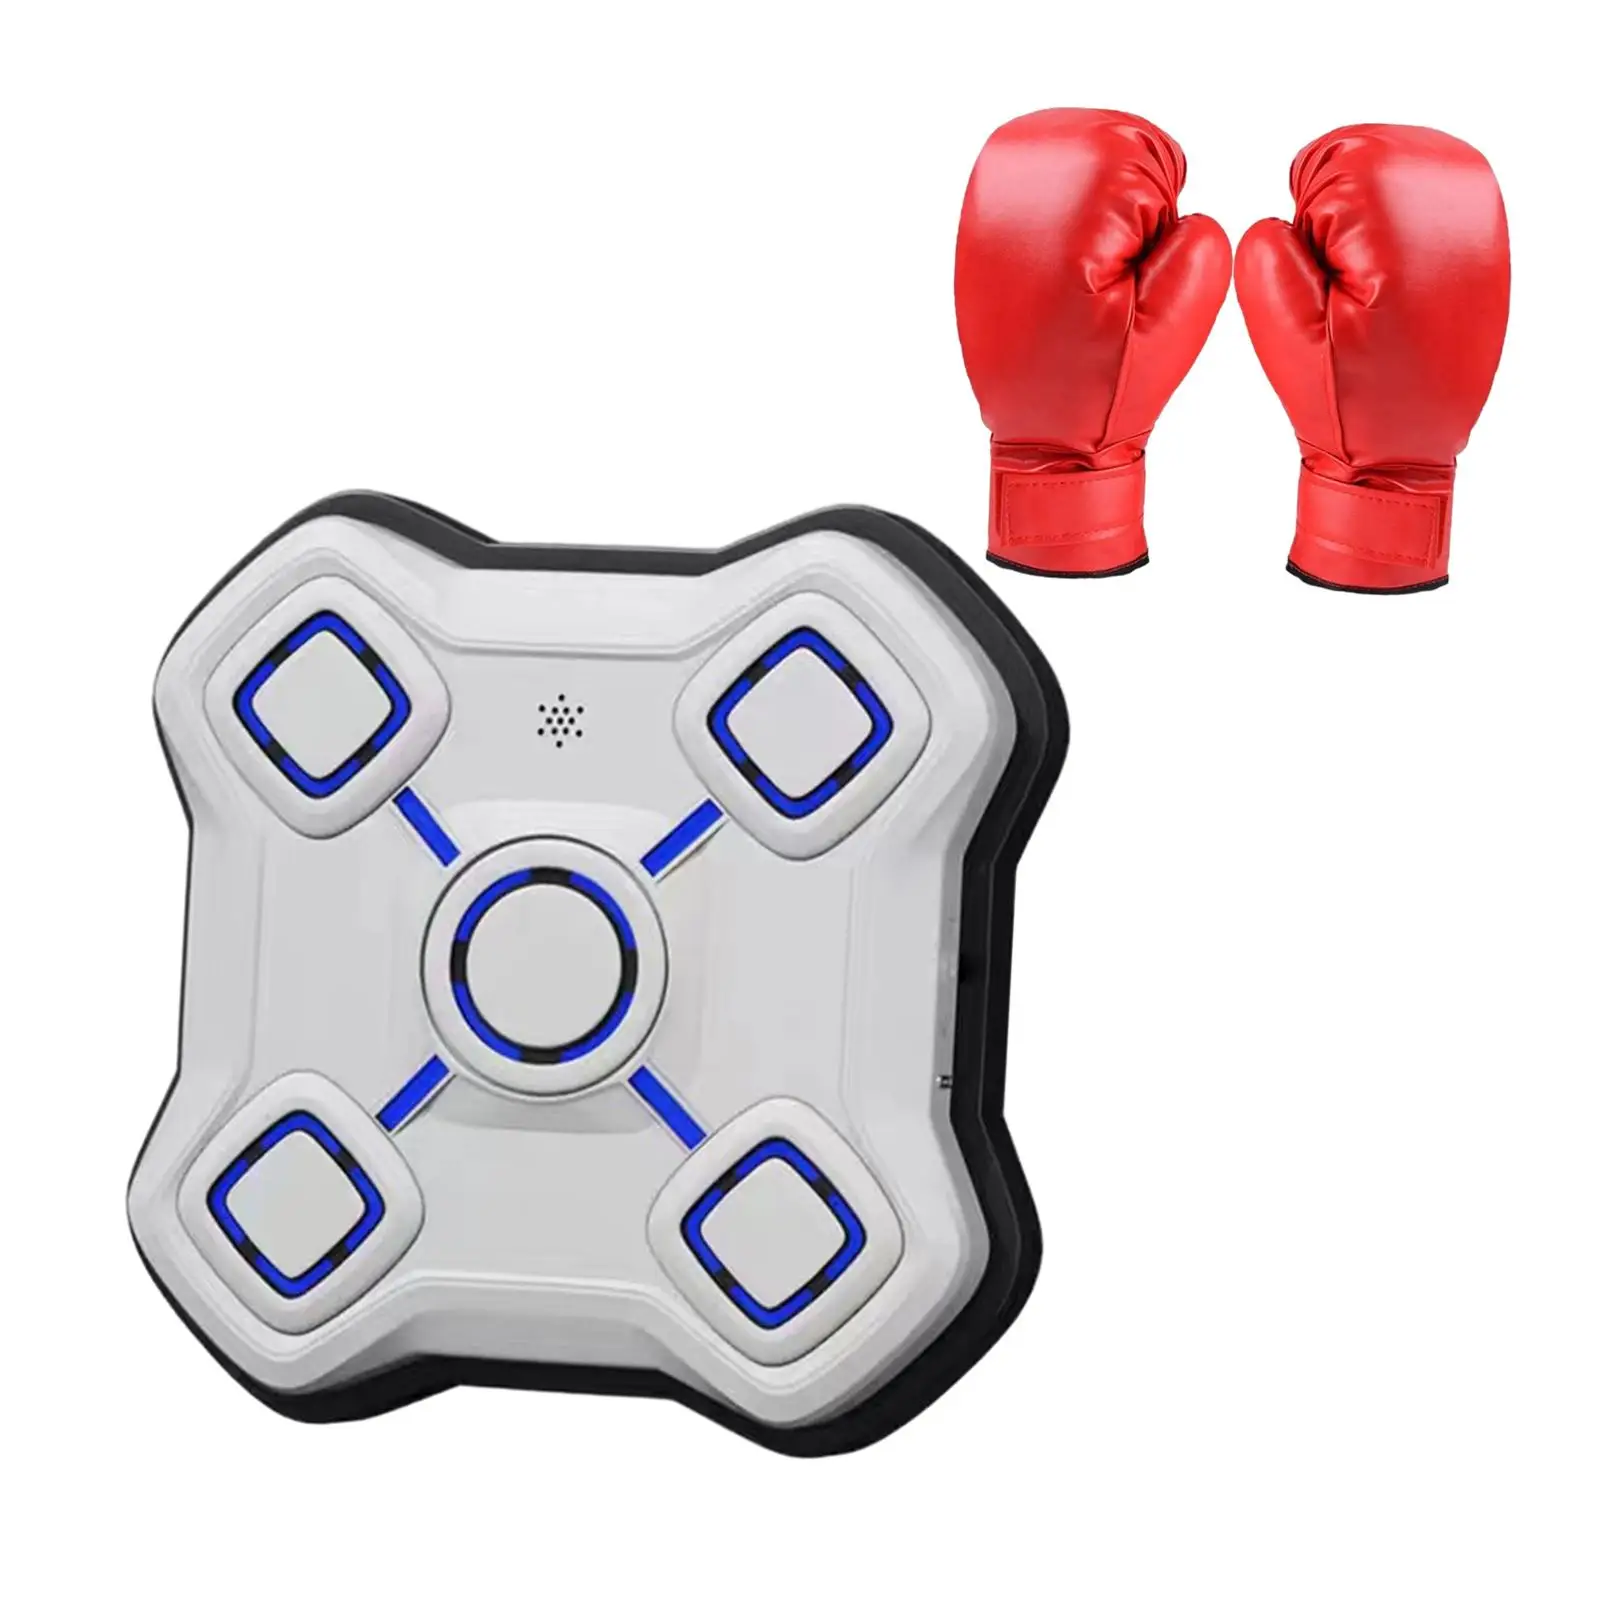 Music Boxing Machine Boxing Trainer Men Women Electronic Boxing Wall Target for Karate Agility Strength Training Exercise Sports